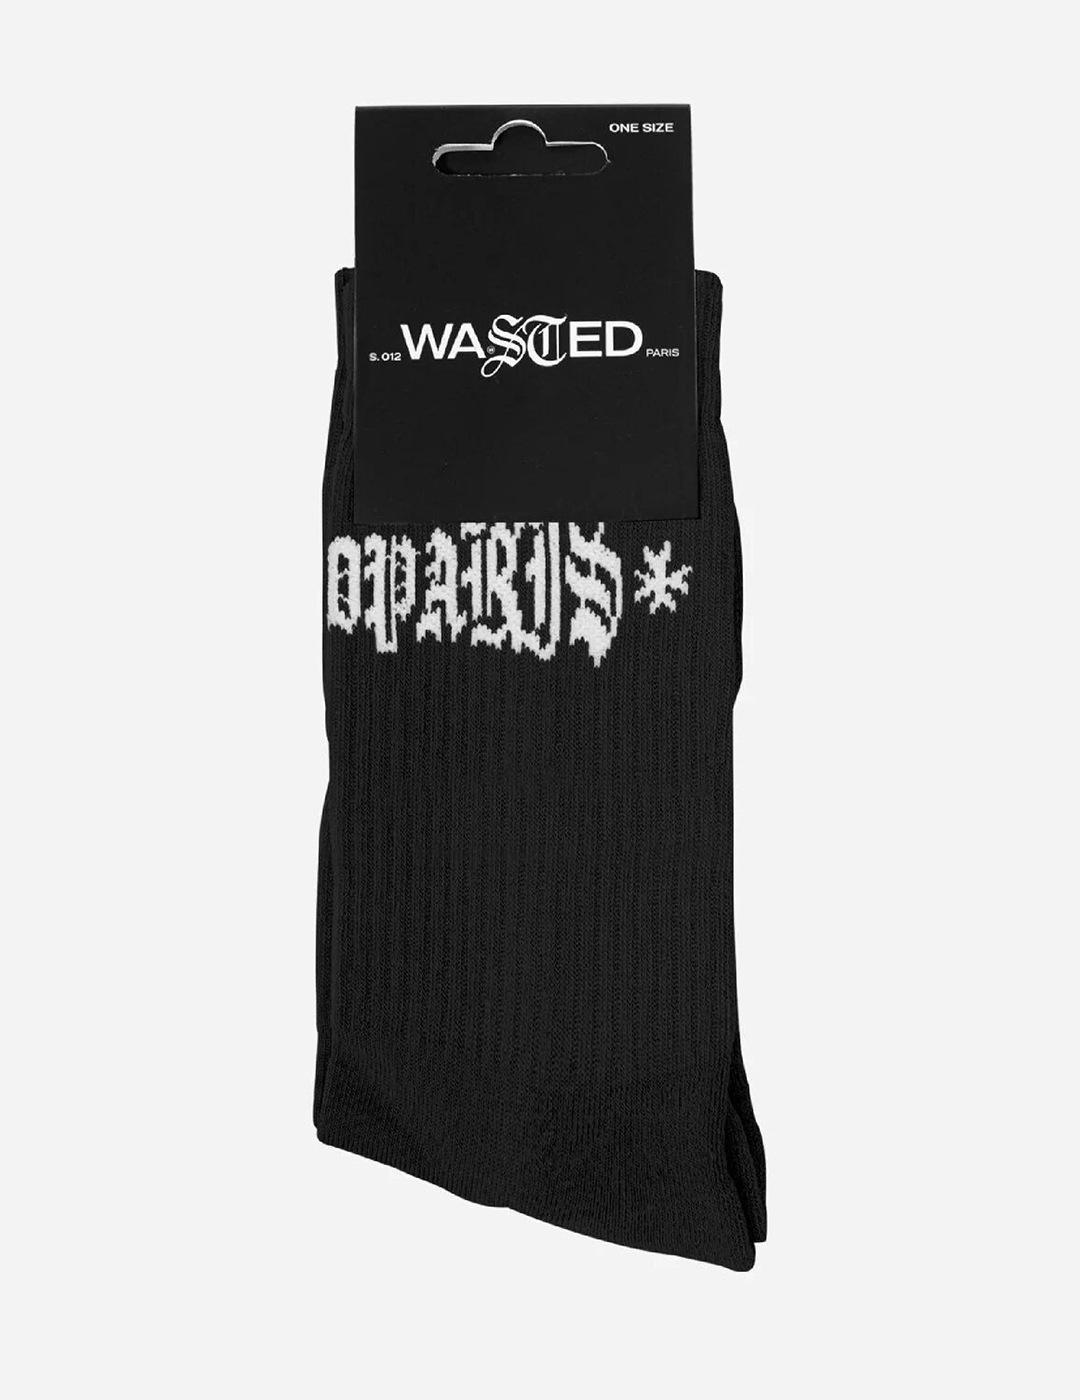 Calcetines WASTED PARIS LONDON CROSS - Negro